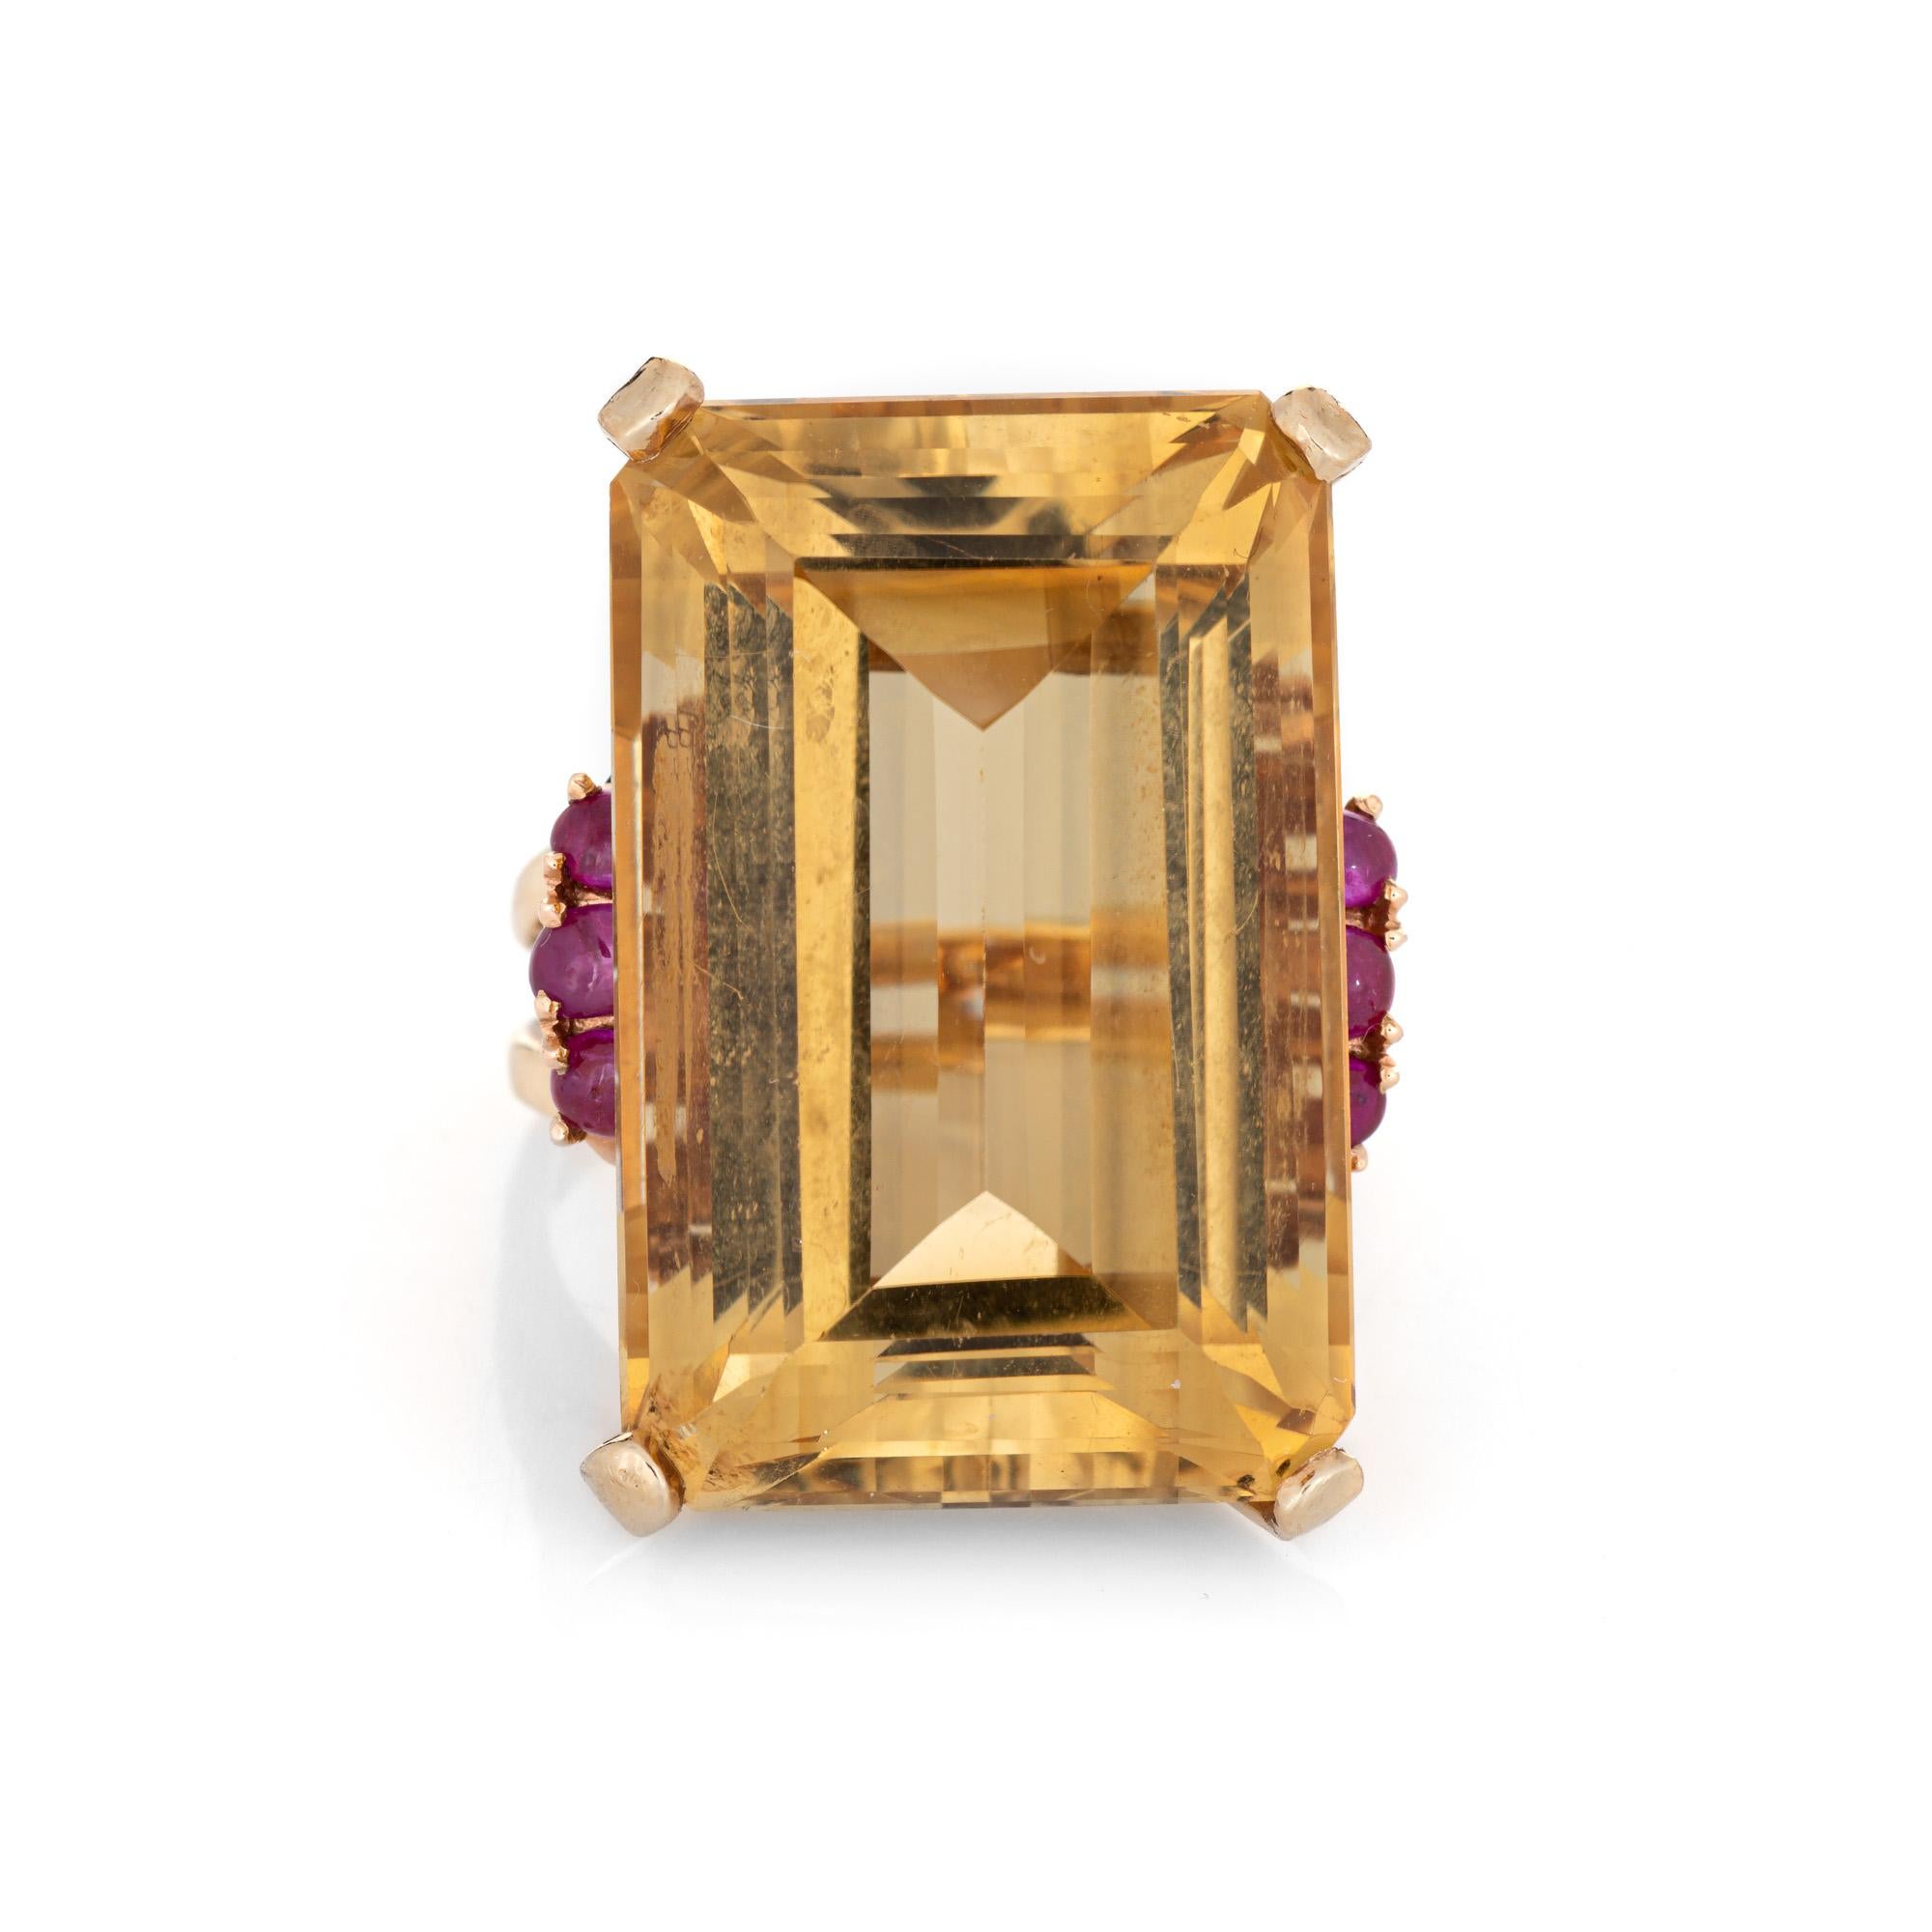 Stylish retro vintage citrine & ruby cocktail ring (circa 1940s) crafted in 14 karat yellow gold. 

Emerald cut citrine measures 29mm x 19mm (estimated at 56.50 carats). Six cabochon cut rubies are estimated at 0.10 carats each (0.60 carats total